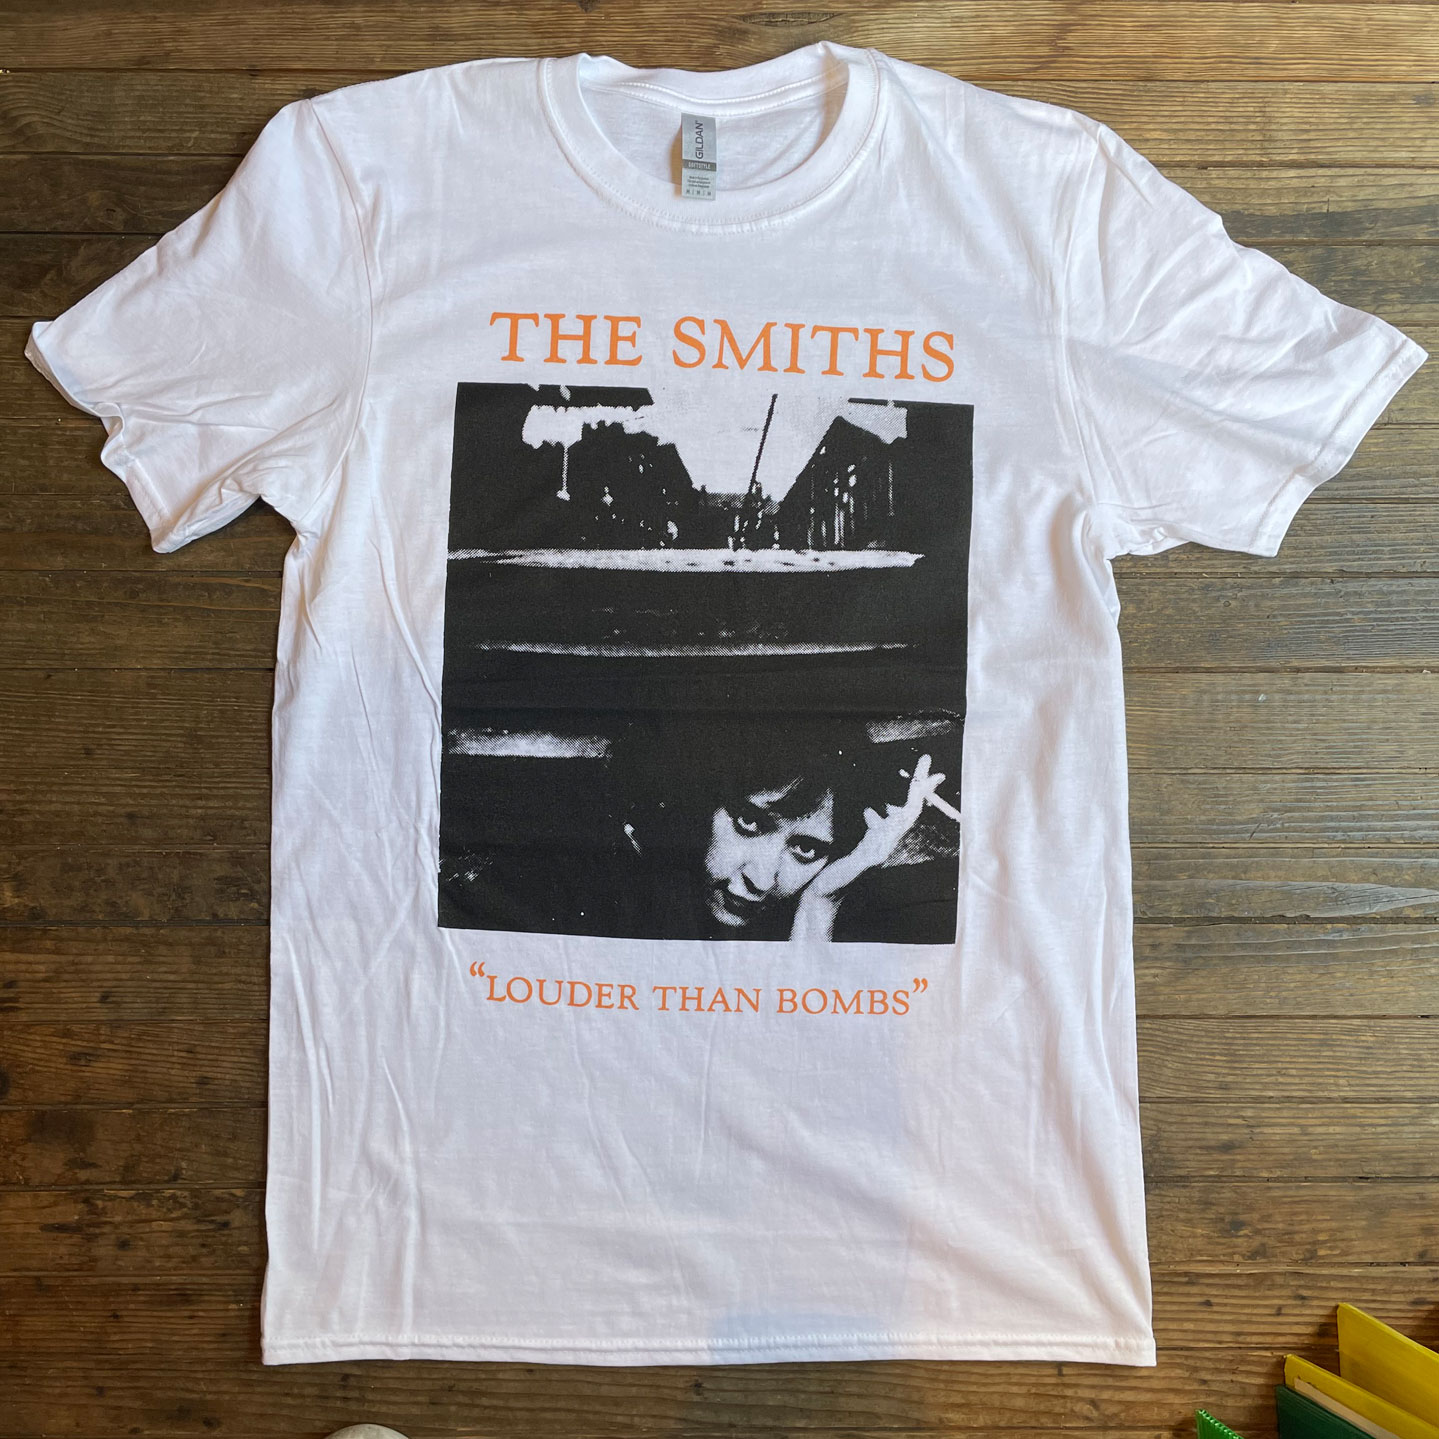 THE SMITHS Tシャツ louder than bombs | 45REVOLUTION